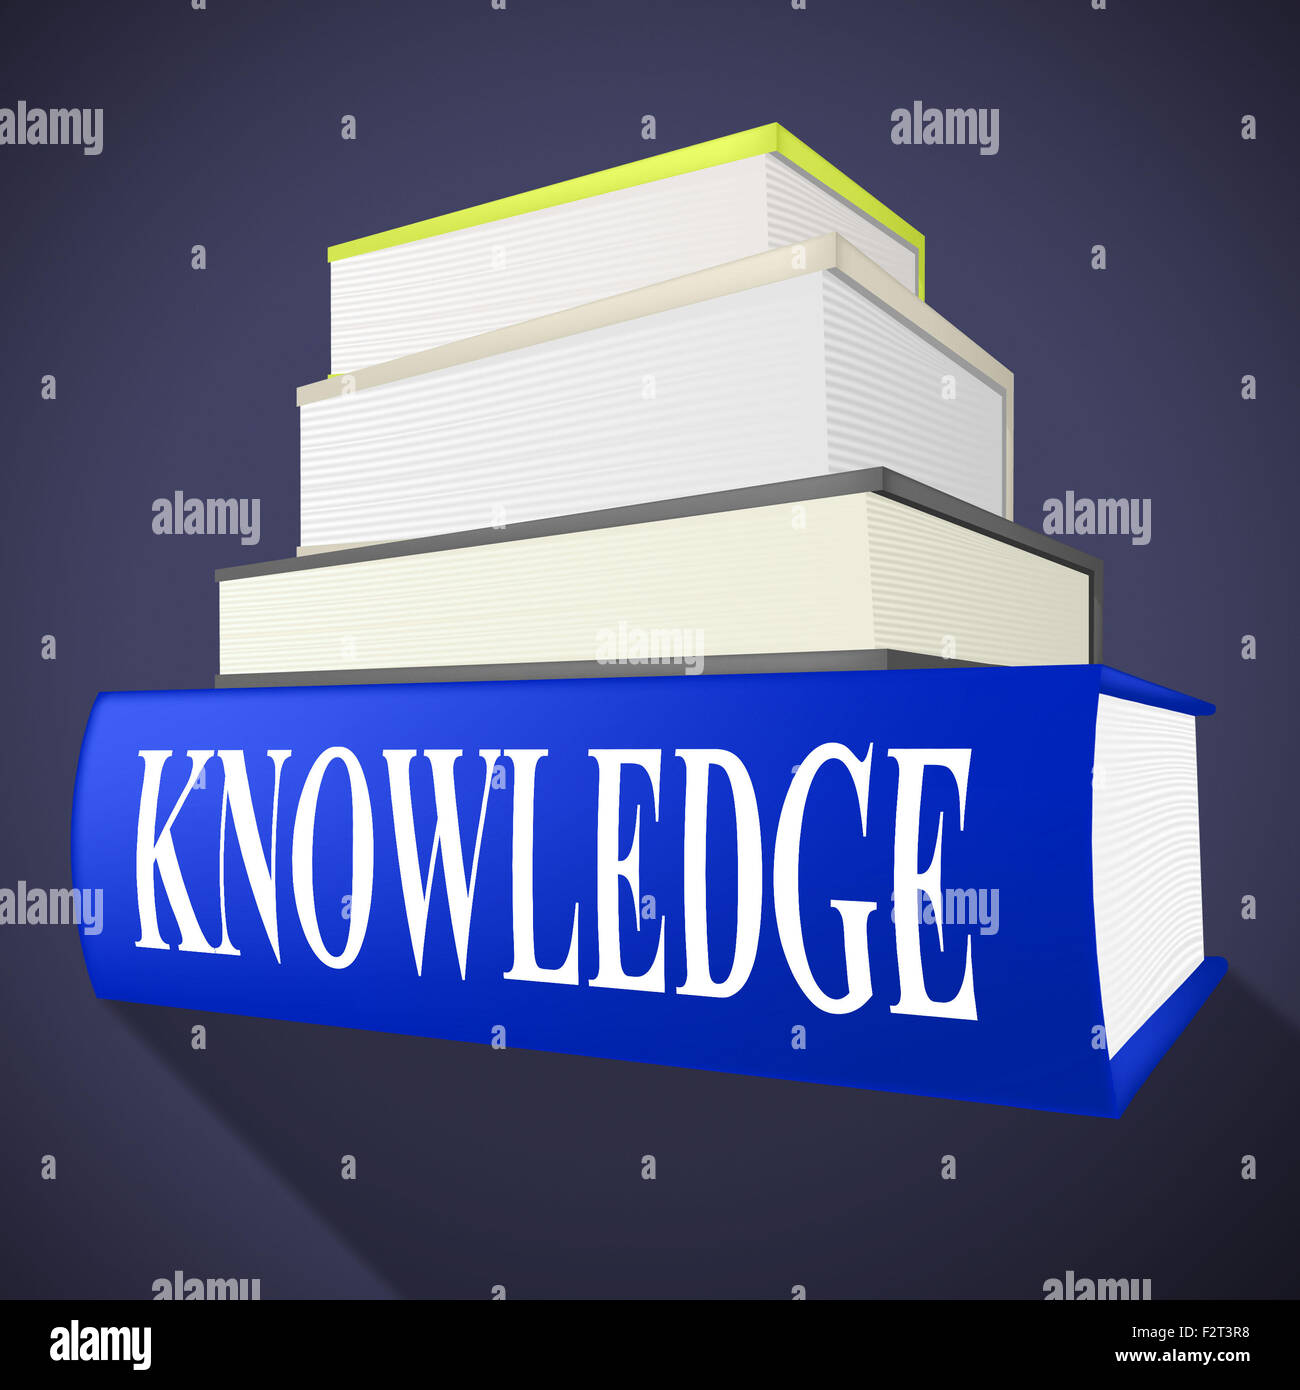 Knowledge Book Indicating Non-Fiction Understanding And Expertness Stock Photo